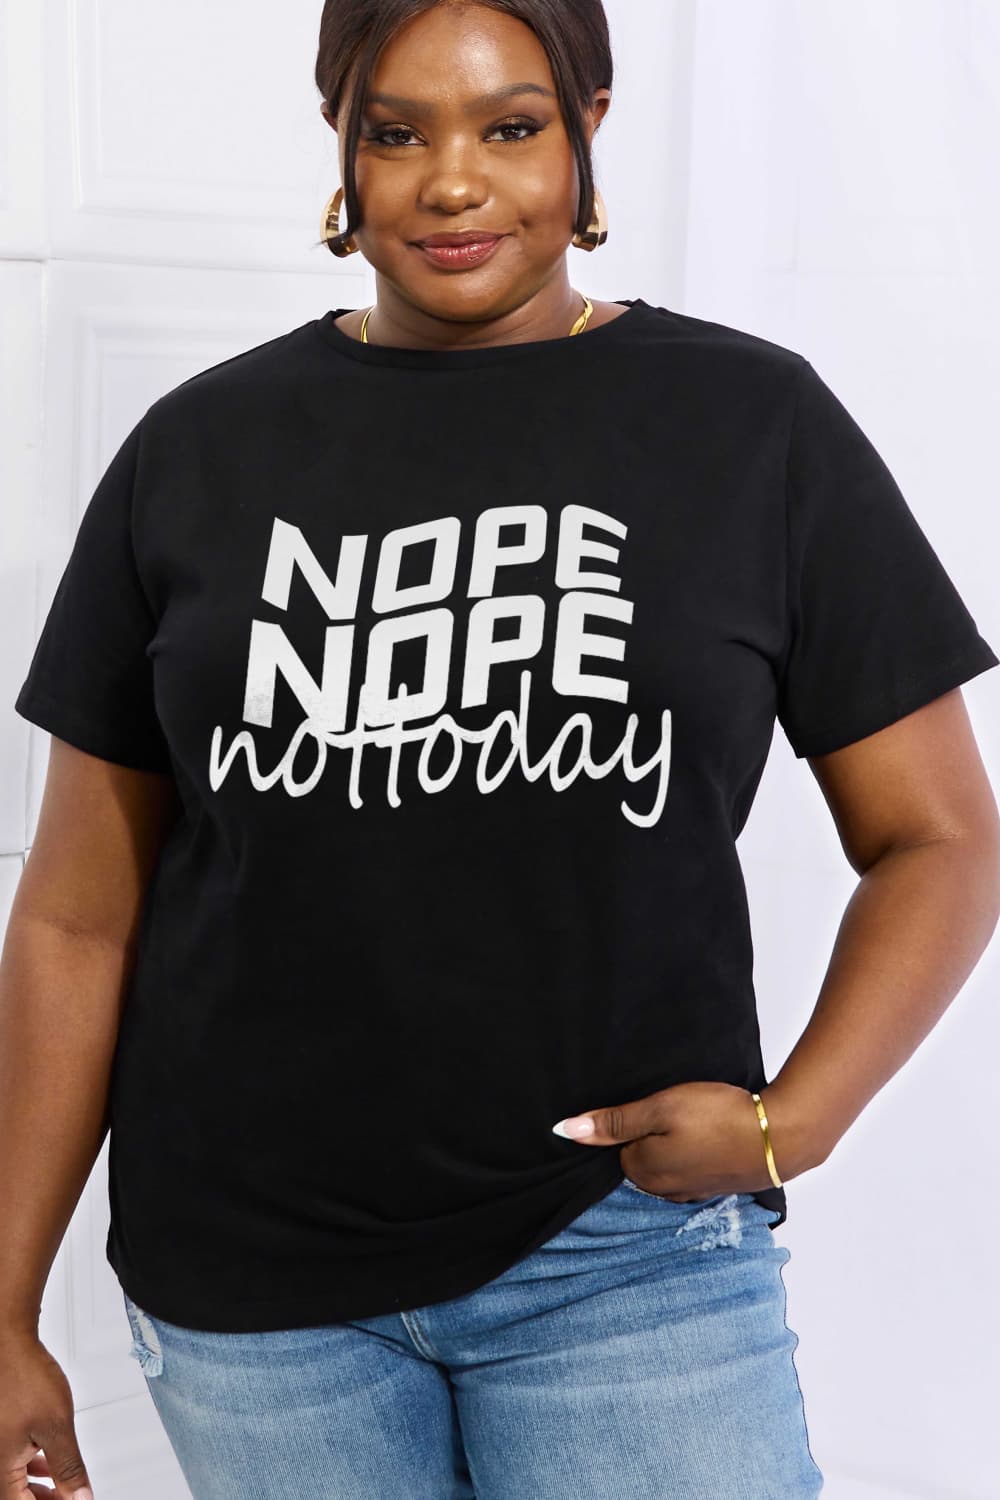 NOPE NOPE NOT TODAY Graphic Cotton Tee - T-Shirts - Shirts & Tops - 8 - 2024